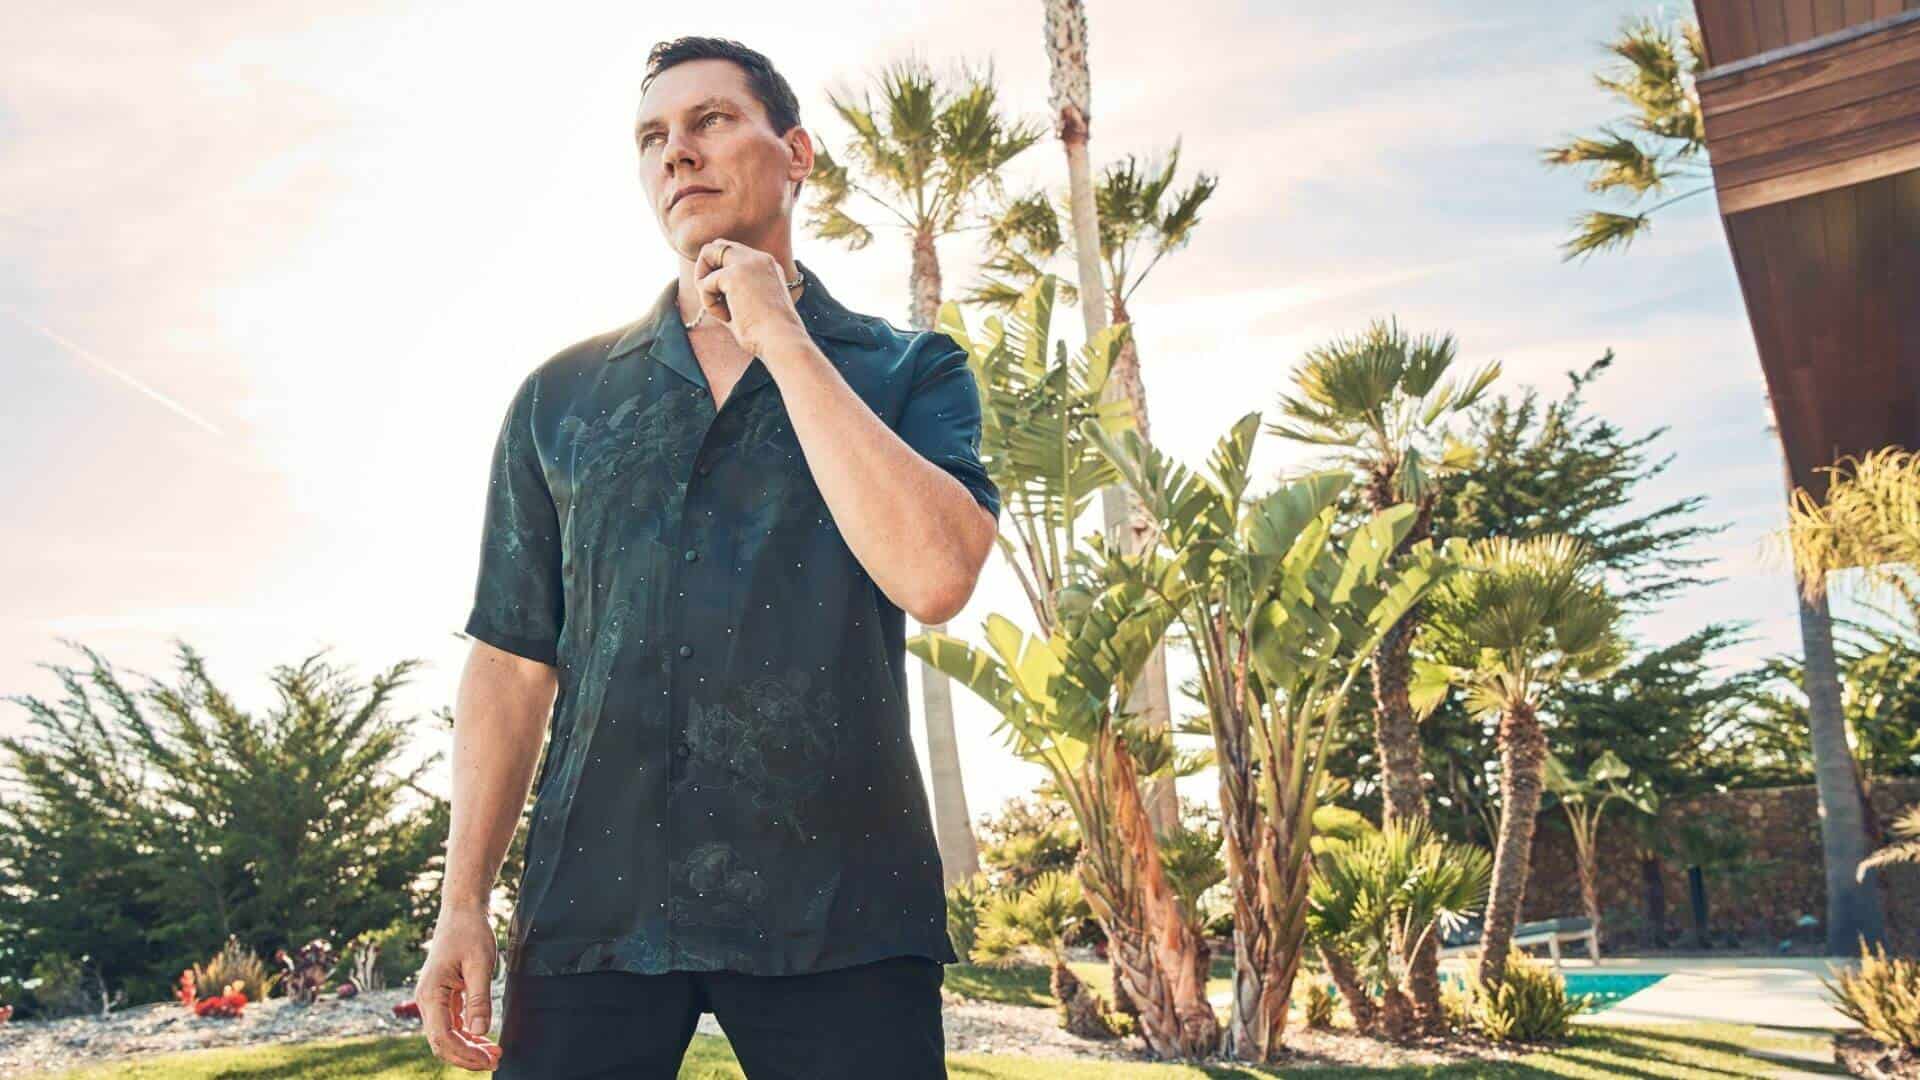 Tiësto delivers timeless remix of Kygo and Ava Max’s ‘Whatever’: Listen